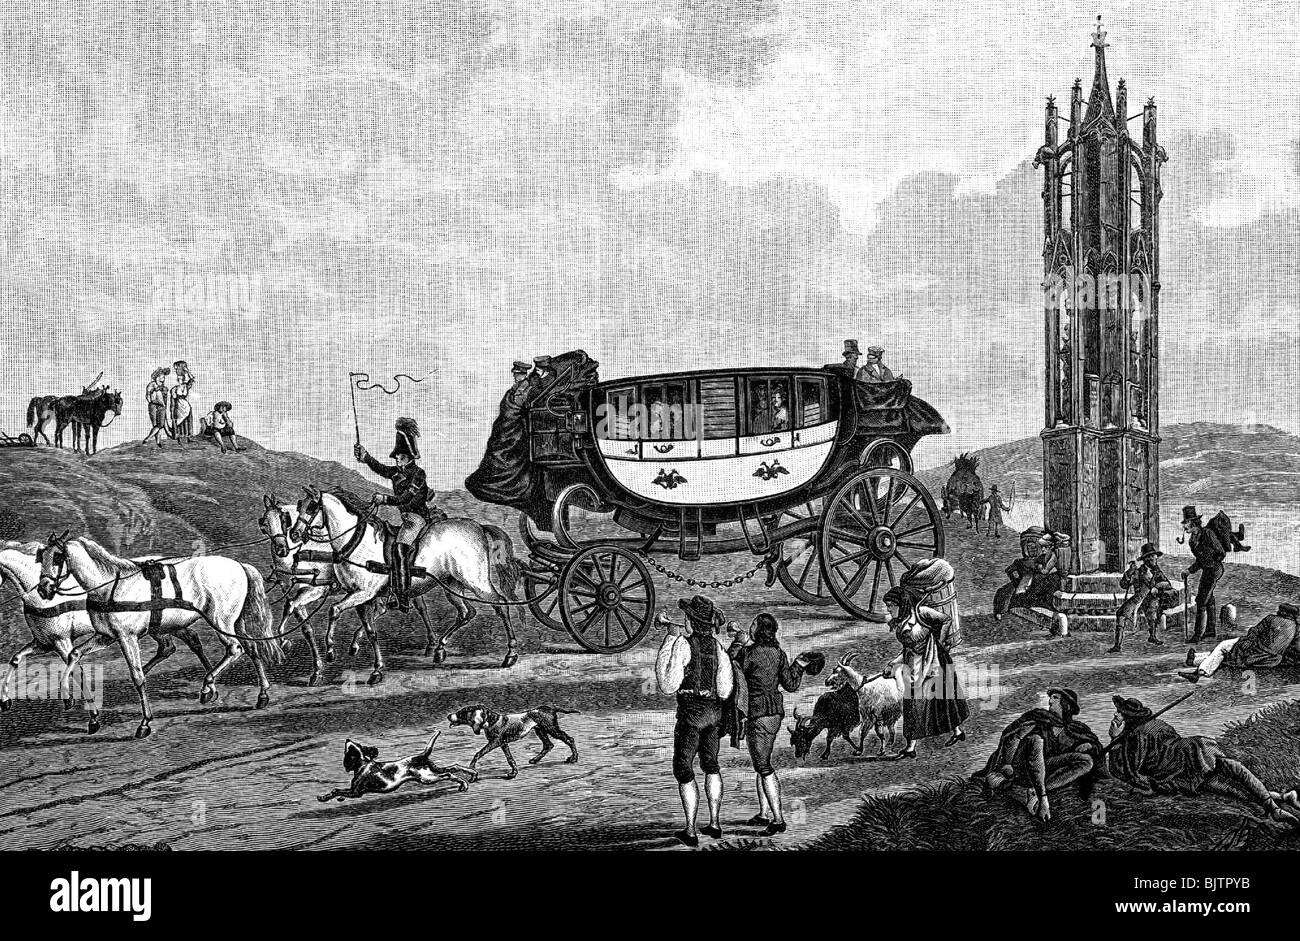 mail / post, mail coach, Austrian express mail coach at Triest imperial road near Vienna, wood engraving, early 19th century, historic, historical, mail coach, mail coaches, coach, carriage, coaches, carriages, Austria, transport / transportation, drive, driving, people, Stock Photo